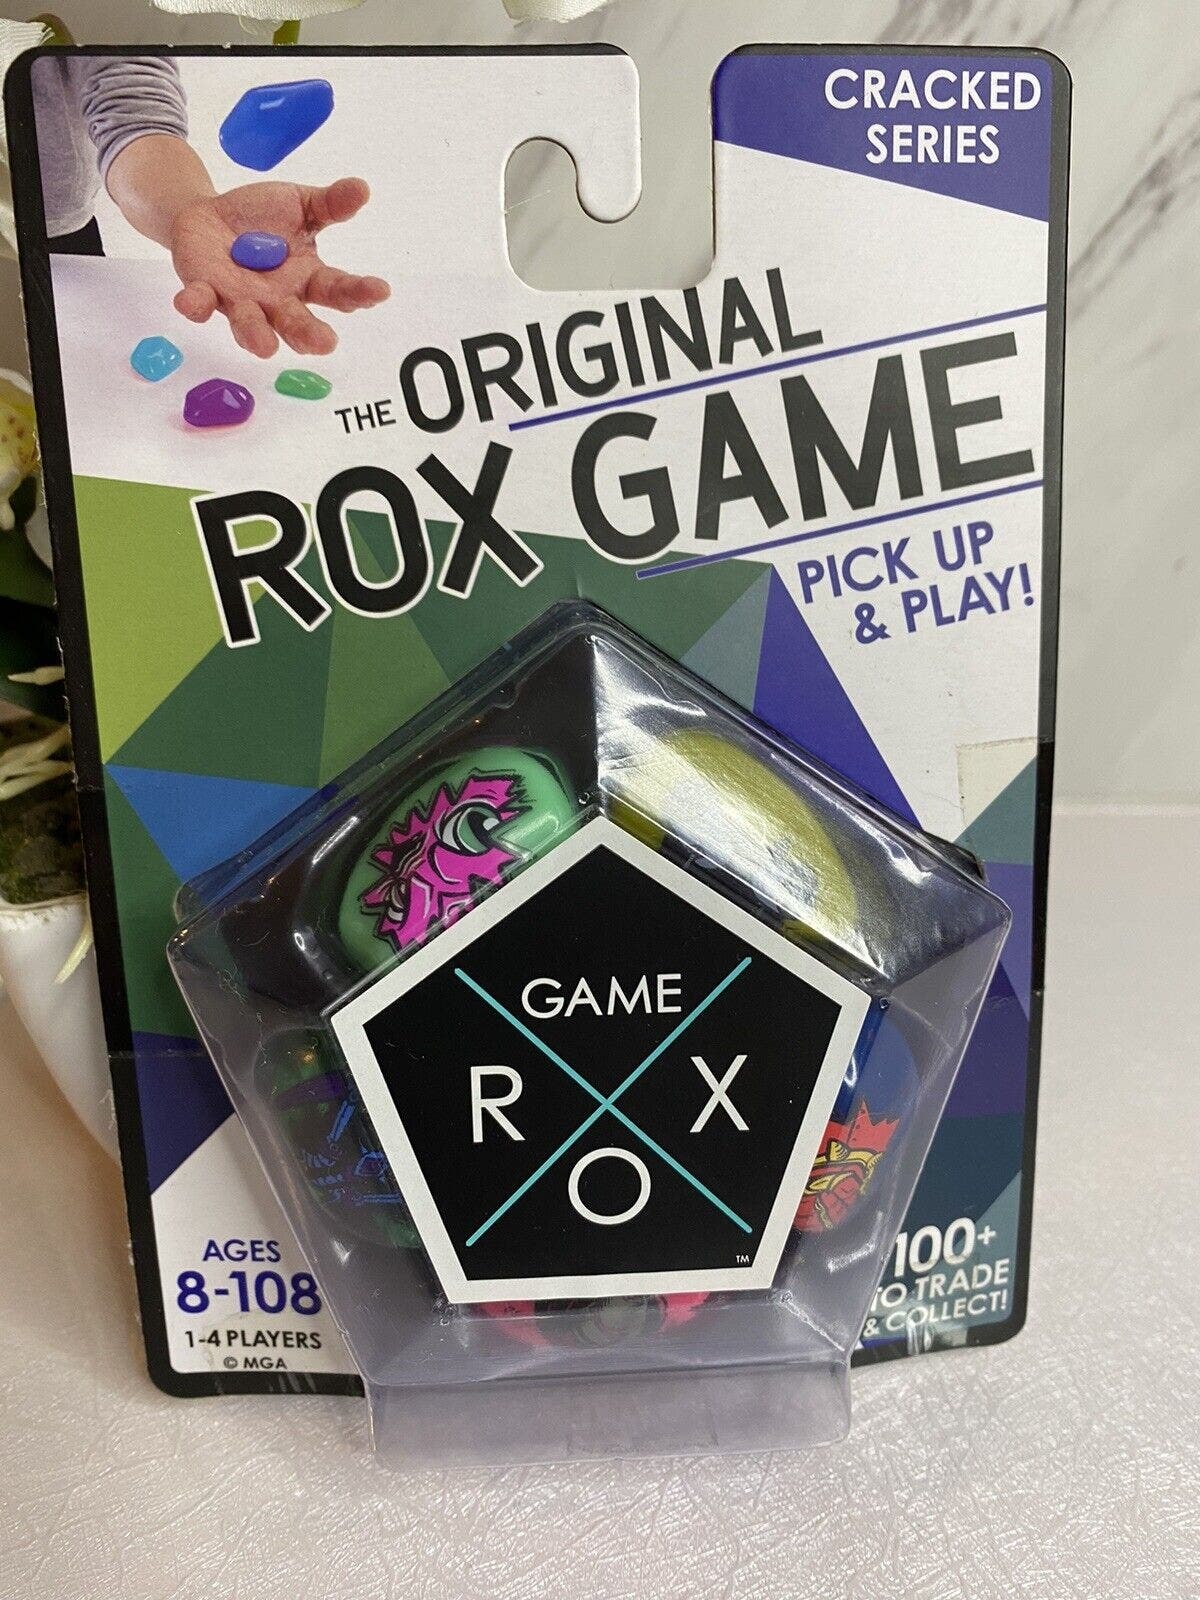 The Original Rox Game Cracked Series 5 Collectible GameRox With Case Free Ship - $9.31